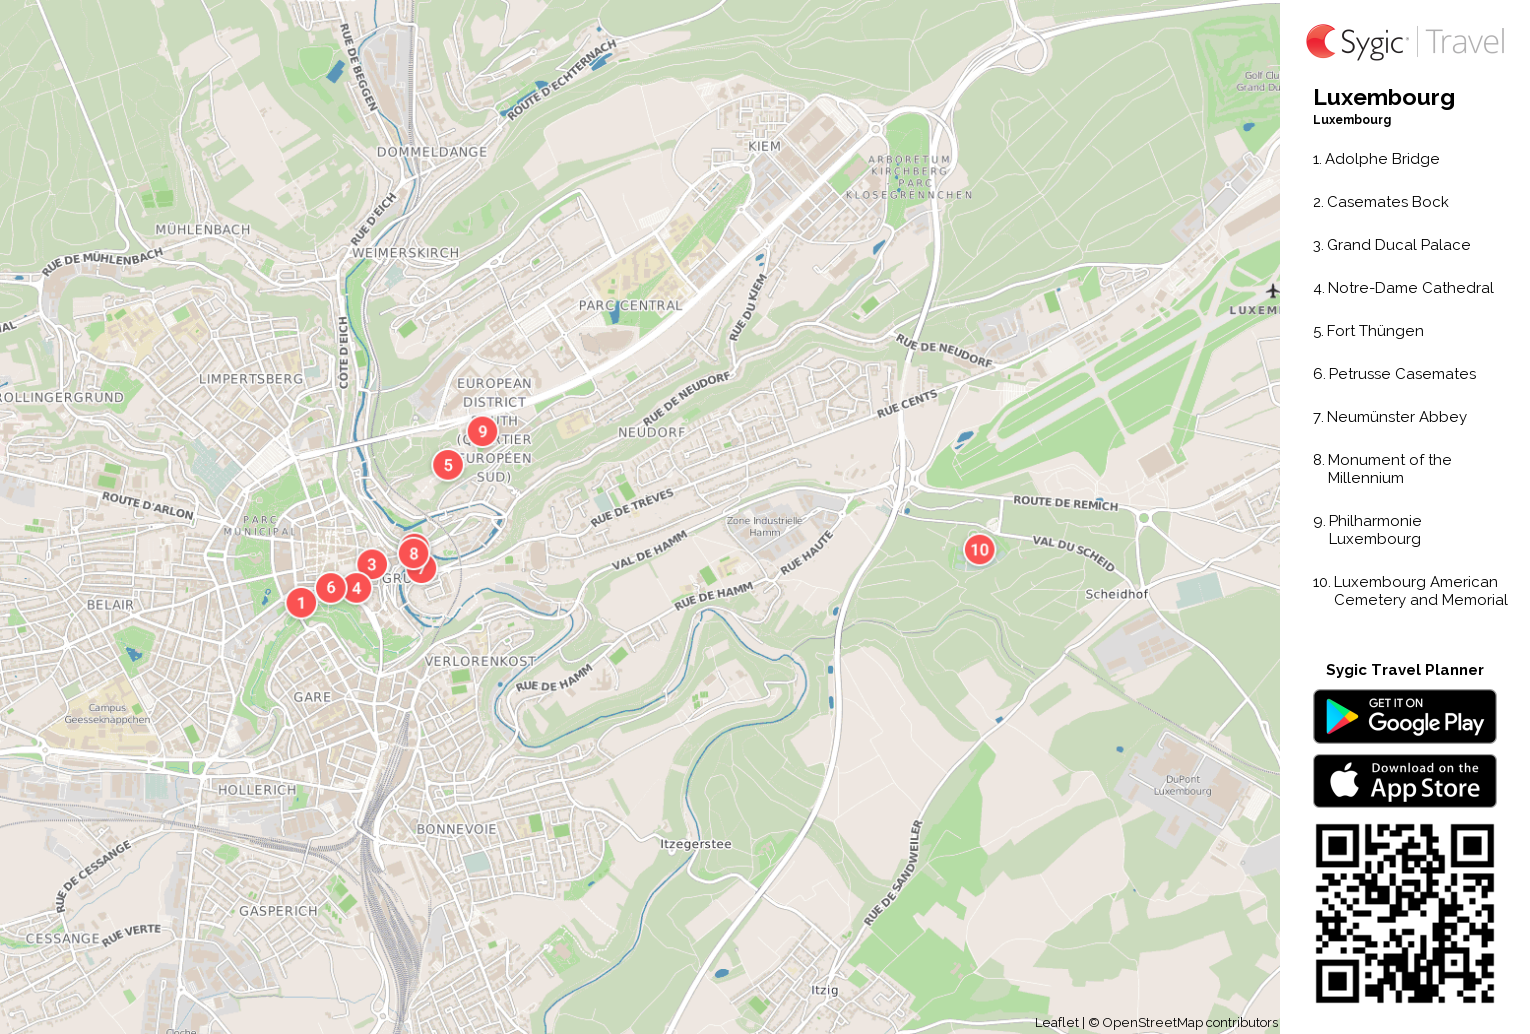 Luxembourg Printable Tourist Map | Sygic Travel